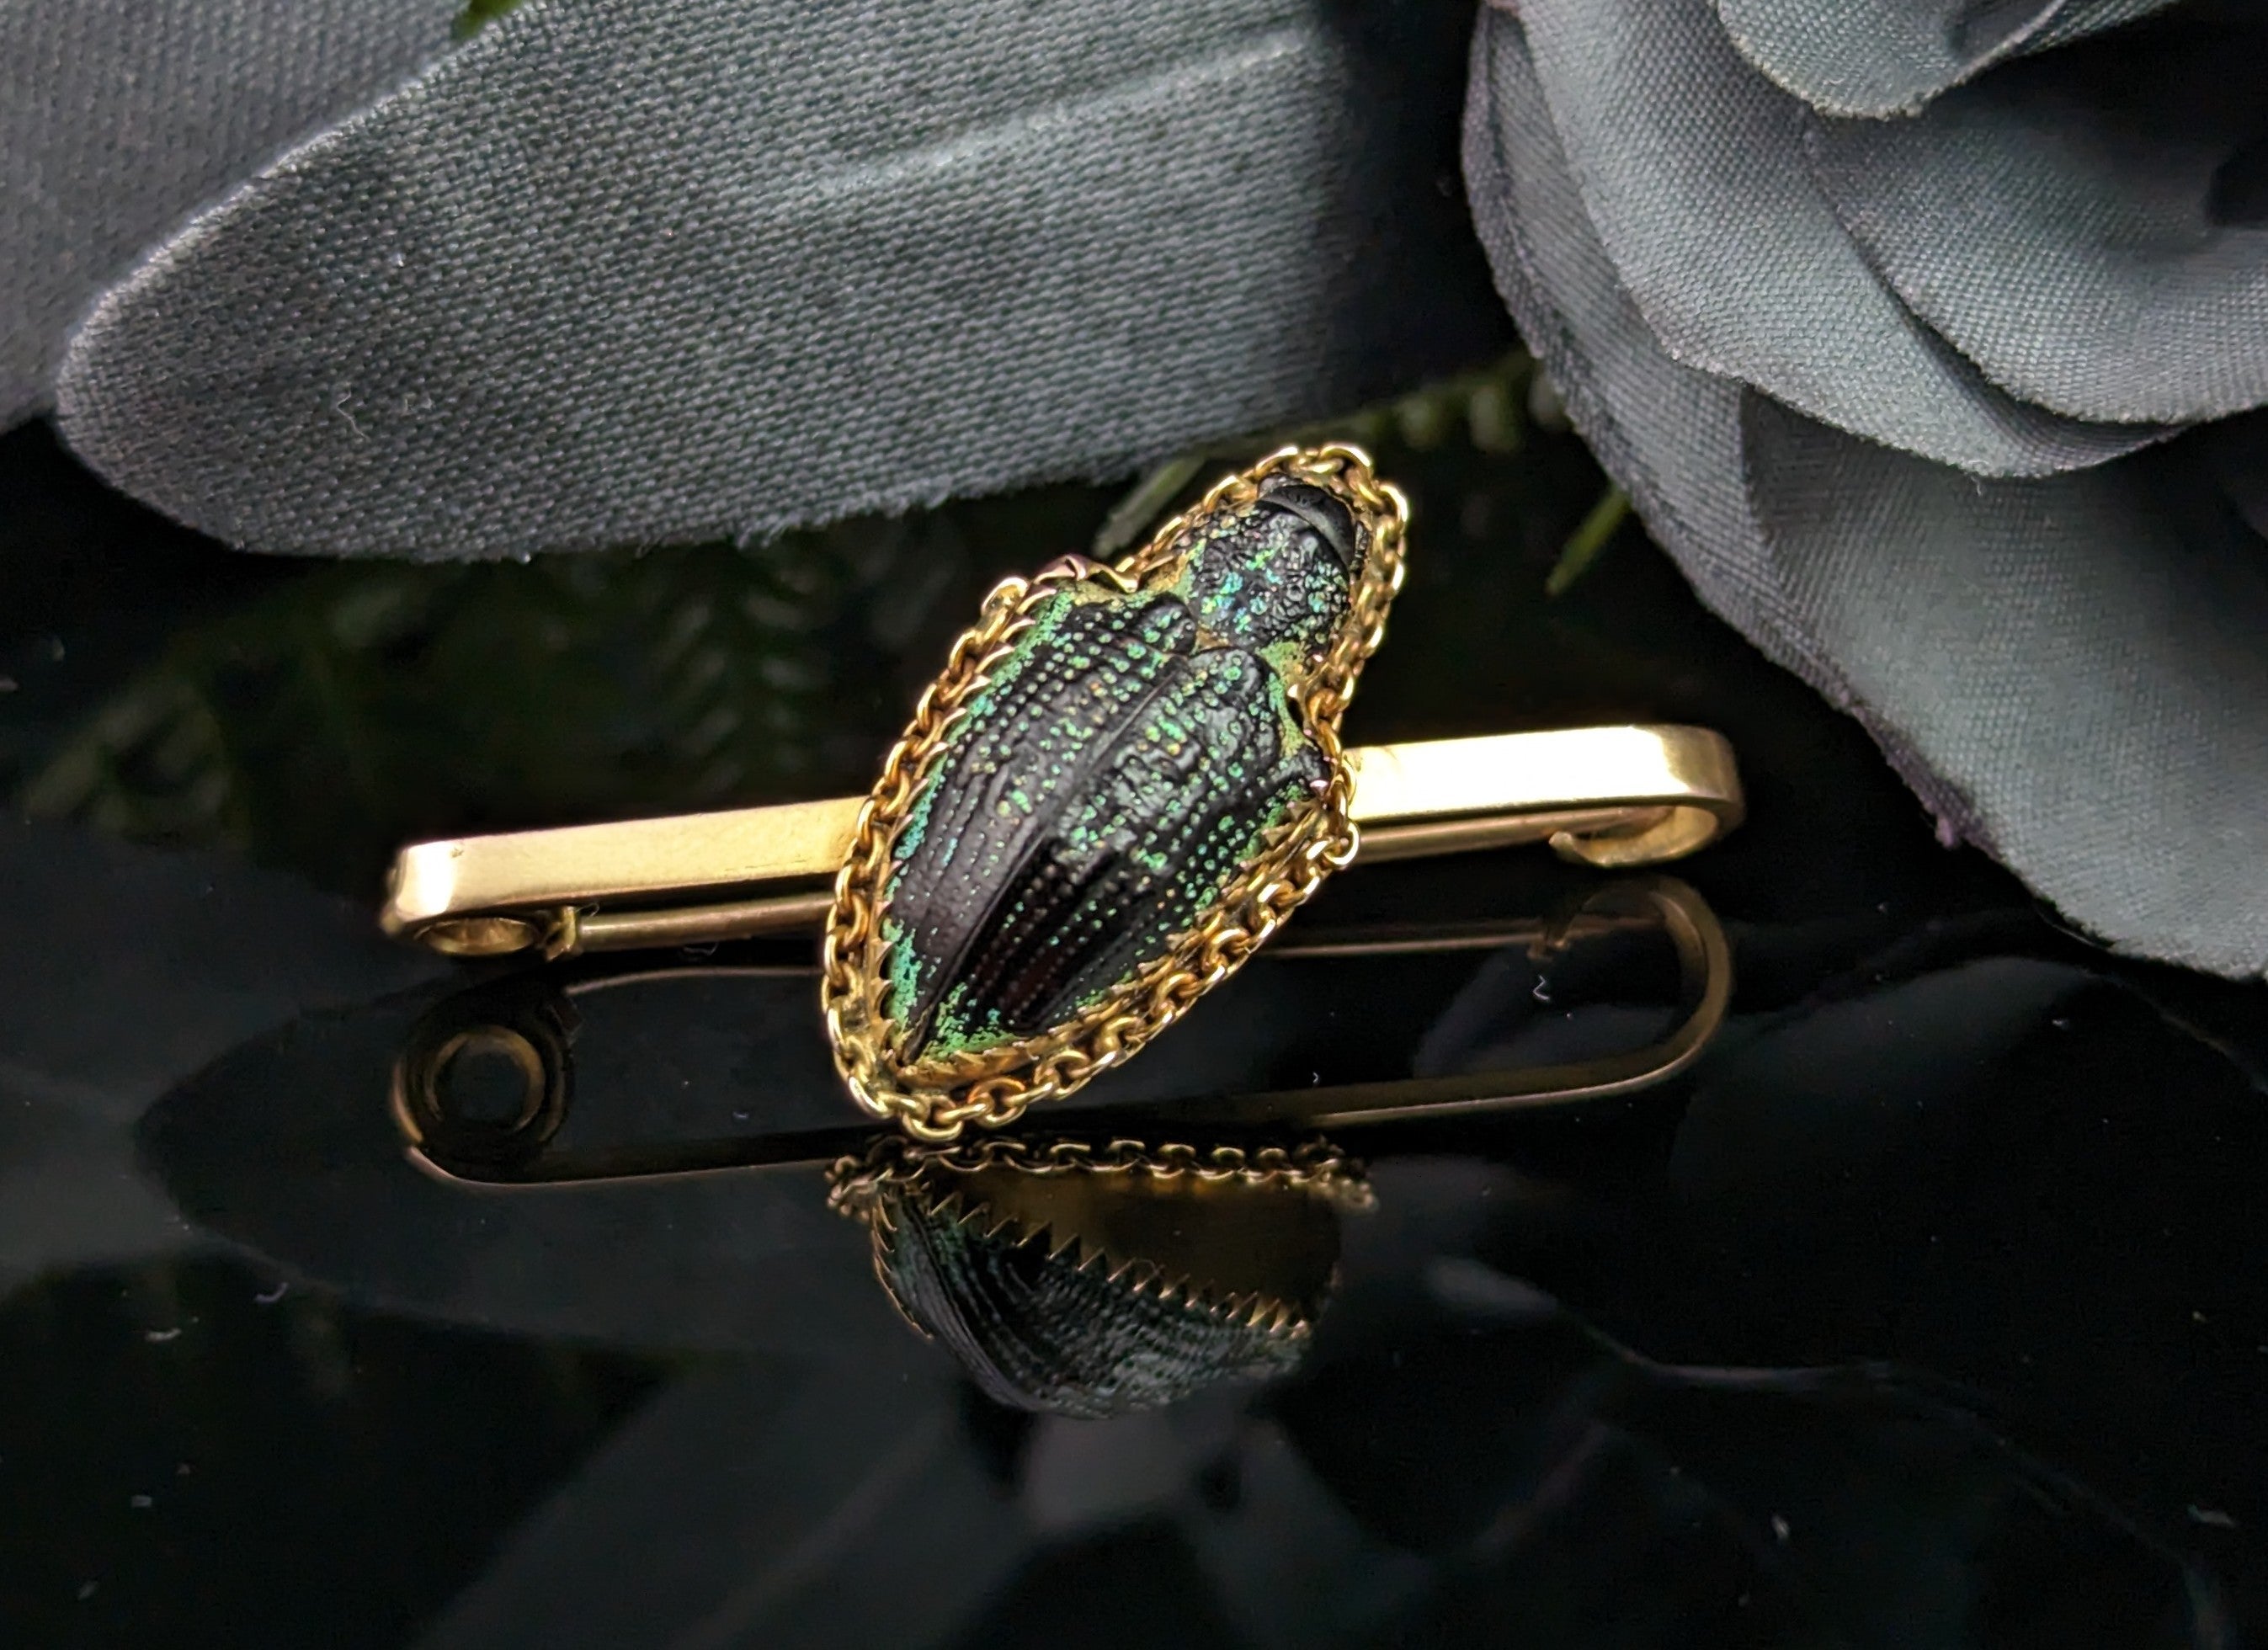 The insect jewellery of the Victorian and Edwardian eras is always popular, like this gorgeous antique, Egyptian revival, 9kt gold and scarab beetle brooch.

This piece features a real scarab beetle, claw set to the centre in a bloomed 9kt gold